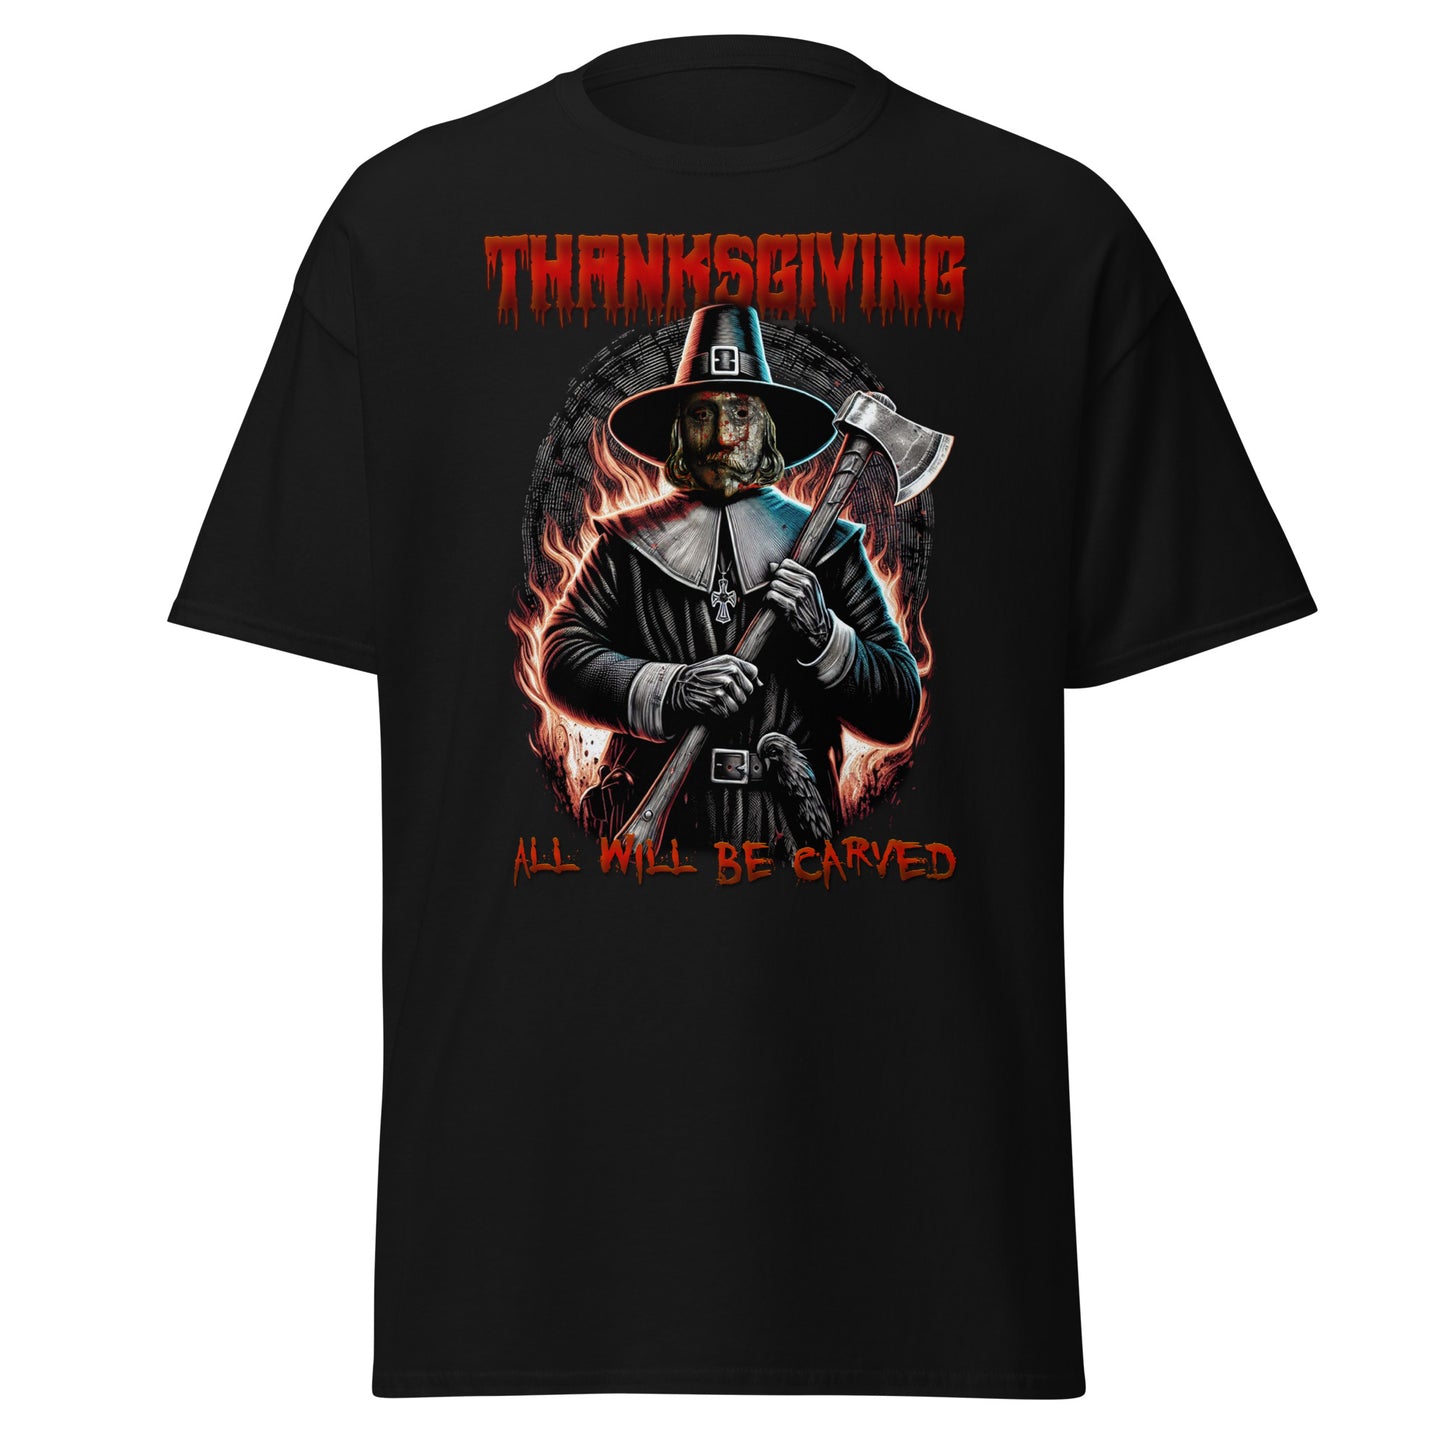 All will be carved: Thanksgiving T-Shirt - John Carver's Night Edition